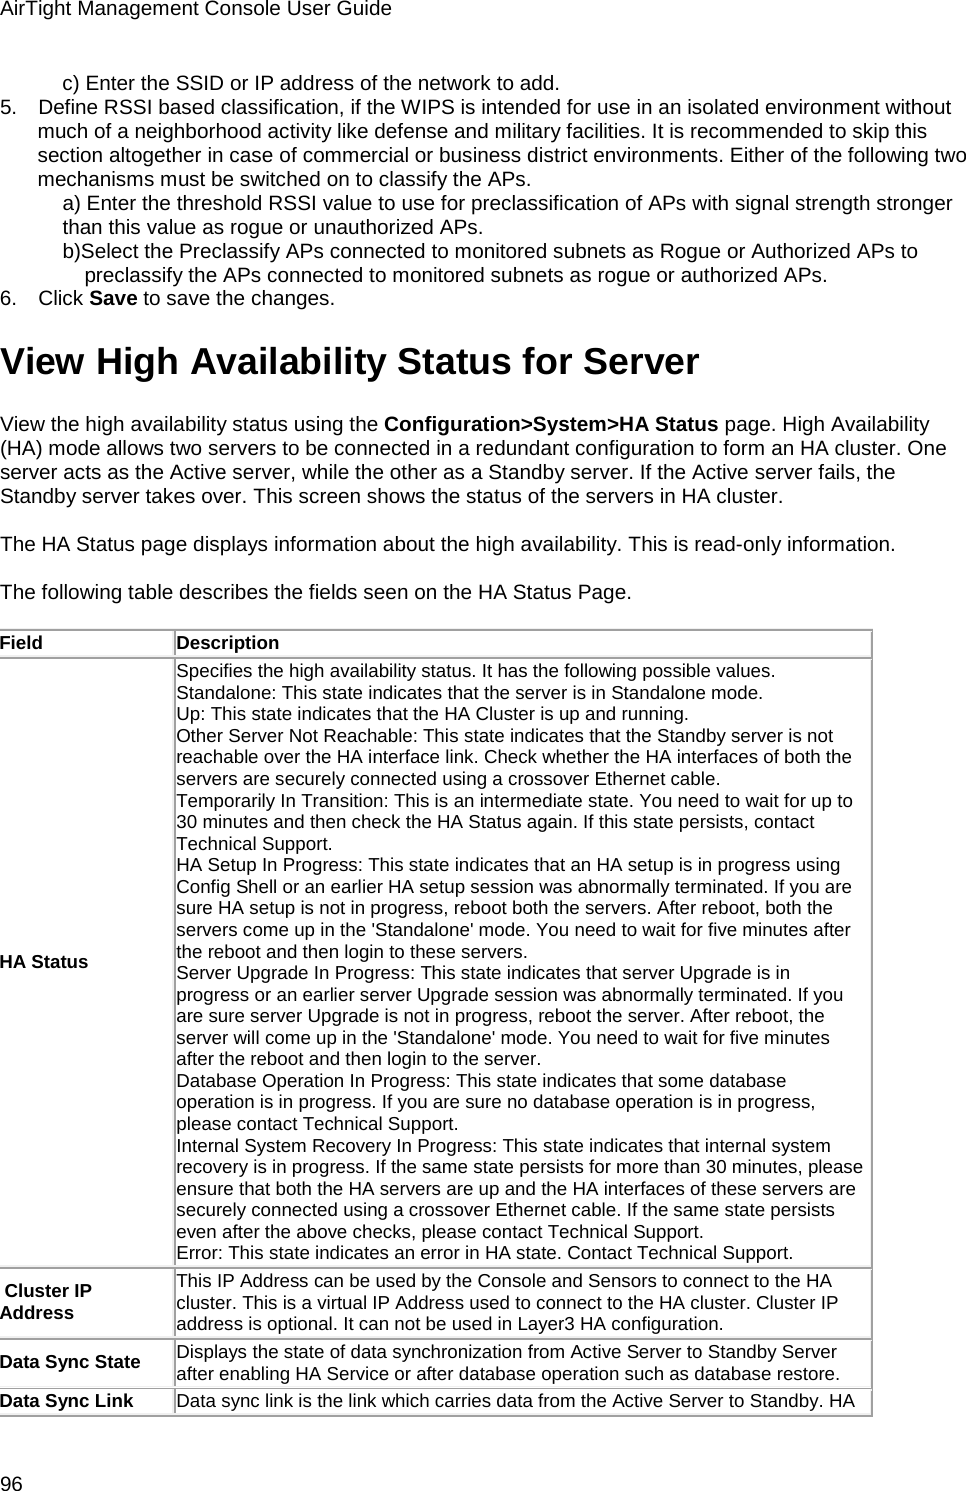 AirTight Management Console User Guide 96 c) Enter the SSID or IP address of the network to add. 5.      Define RSSI based classification, if the WIPS is intended for use in an isolated environment without much of a neighborhood activity like defense and military facilities. It is recommended to skip this section altogether in case of commercial or business district environments. Either of the following two mechanisms must be switched on to classify the APs. a) Enter the threshold RSSI value to use for preclassification of APs with signal strength stronger than this value as rogue or unauthorized APs. b)Select the Preclassify APs connected to monitored subnets as Rogue or Authorized APs to preclassify the APs connected to monitored subnets as rogue or authorized APs. 6.      Click Save to save the changes. View High Availability Status for Server View the high availability status using the Configuration&gt;System&gt;HA Status page. High Availability (HA) mode allows two servers to be connected in a redundant configuration to form an HA cluster. One server acts as the Active server, while the other as a Standby server. If the Active server fails, the Standby server takes over. This screen shows the status of the servers in HA cluster.   The HA Status page displays information about the high availability. This is read-only information.   The following table describes the fields seen on the HA Status Page.   Field Description HA Status Specifies the high availability status. It has the following possible values.  Standalone: This state indicates that the server is in Standalone mode.  Up: This state indicates that the HA Cluster is up and running. Other Server Not Reachable: This state indicates that the Standby server is not reachable over the HA interface link. Check whether the HA interfaces of both the servers are securely connected using a crossover Ethernet cable. Temporarily In Transition: This is an intermediate state. You need to wait for up to 30 minutes and then check the HA Status again. If this state persists, contact Technical Support. HA Setup In Progress: This state indicates that an HA setup is in progress using Config Shell or an earlier HA setup session was abnormally terminated. If you are sure HA setup is not in progress, reboot both the servers. After reboot, both the servers come up in the &apos;Standalone&apos; mode. You need to wait for five minutes after the reboot and then login to these servers. Server Upgrade In Progress: This state indicates that server Upgrade is in progress or an earlier server Upgrade session was abnormally terminated. If you are sure server Upgrade is not in progress, reboot the server. After reboot, the server will come up in the &apos;Standalone&apos; mode. You need to wait for five minutes after the reboot and then login to the server. Database Operation In Progress: This state indicates that some database operation is in progress. If you are sure no database operation is in progress, please contact Technical Support. Internal System Recovery In Progress: This state indicates that internal system recovery is in progress. If the same state persists for more than 30 minutes, please ensure that both the HA servers are up and the HA interfaces of these servers are securely connected using a crossover Ethernet cable. If the same state persists even after the above checks, please contact Technical Support. Error: This state indicates an error in HA state. Contact Technical Support.  Cluster IP Address This IP Address can be used by the Console and Sensors to connect to the HA cluster. This is a virtual IP Address used to connect to the HA cluster. Cluster IP address is optional. It can not be used in Layer3 HA configuration. Data Sync State Displays the state of data synchronization from Active Server to Standby Server after enabling HA Service or after database operation such as database restore. Data Sync Link Data sync link is the link which carries data from the Active Server to Standby. HA 